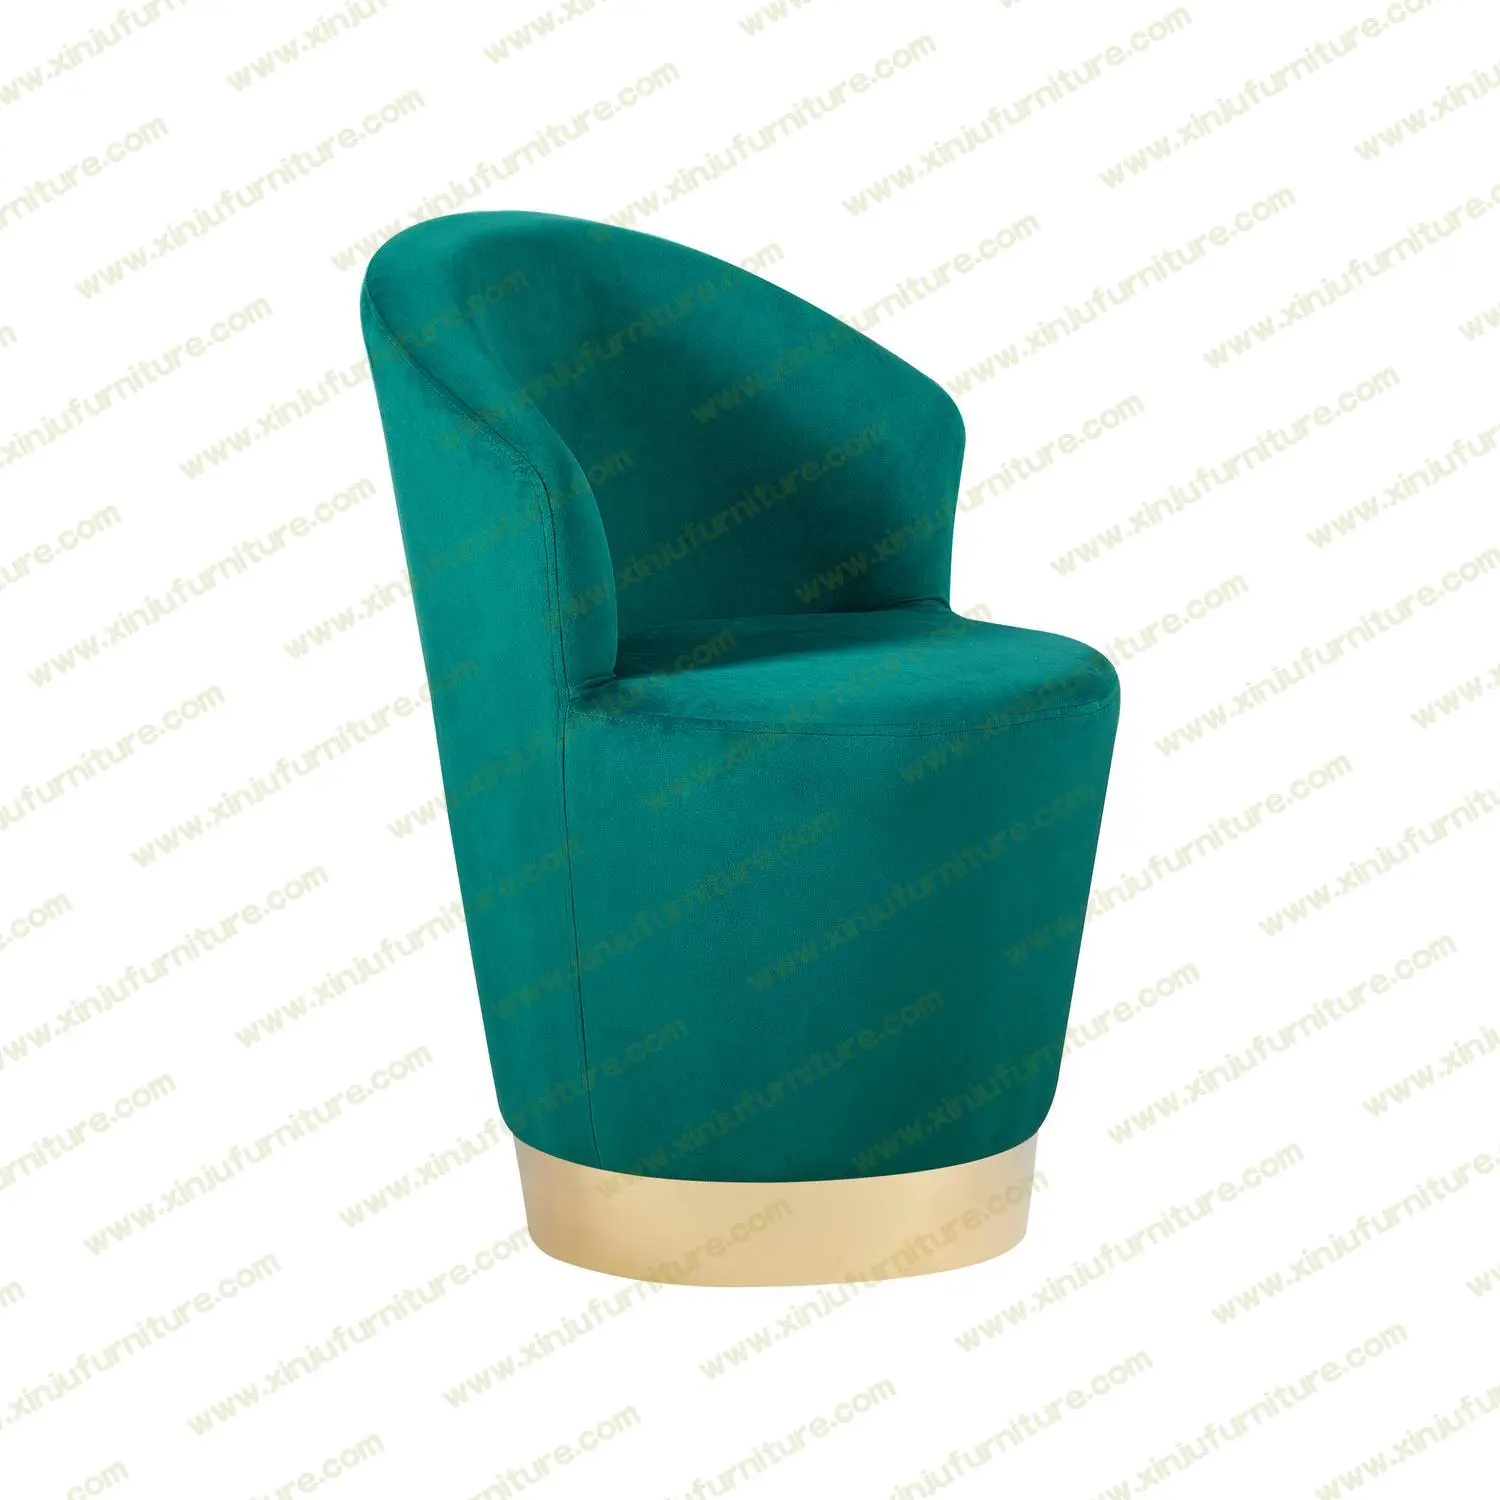 Beautiful and durable dining chair for restaurant